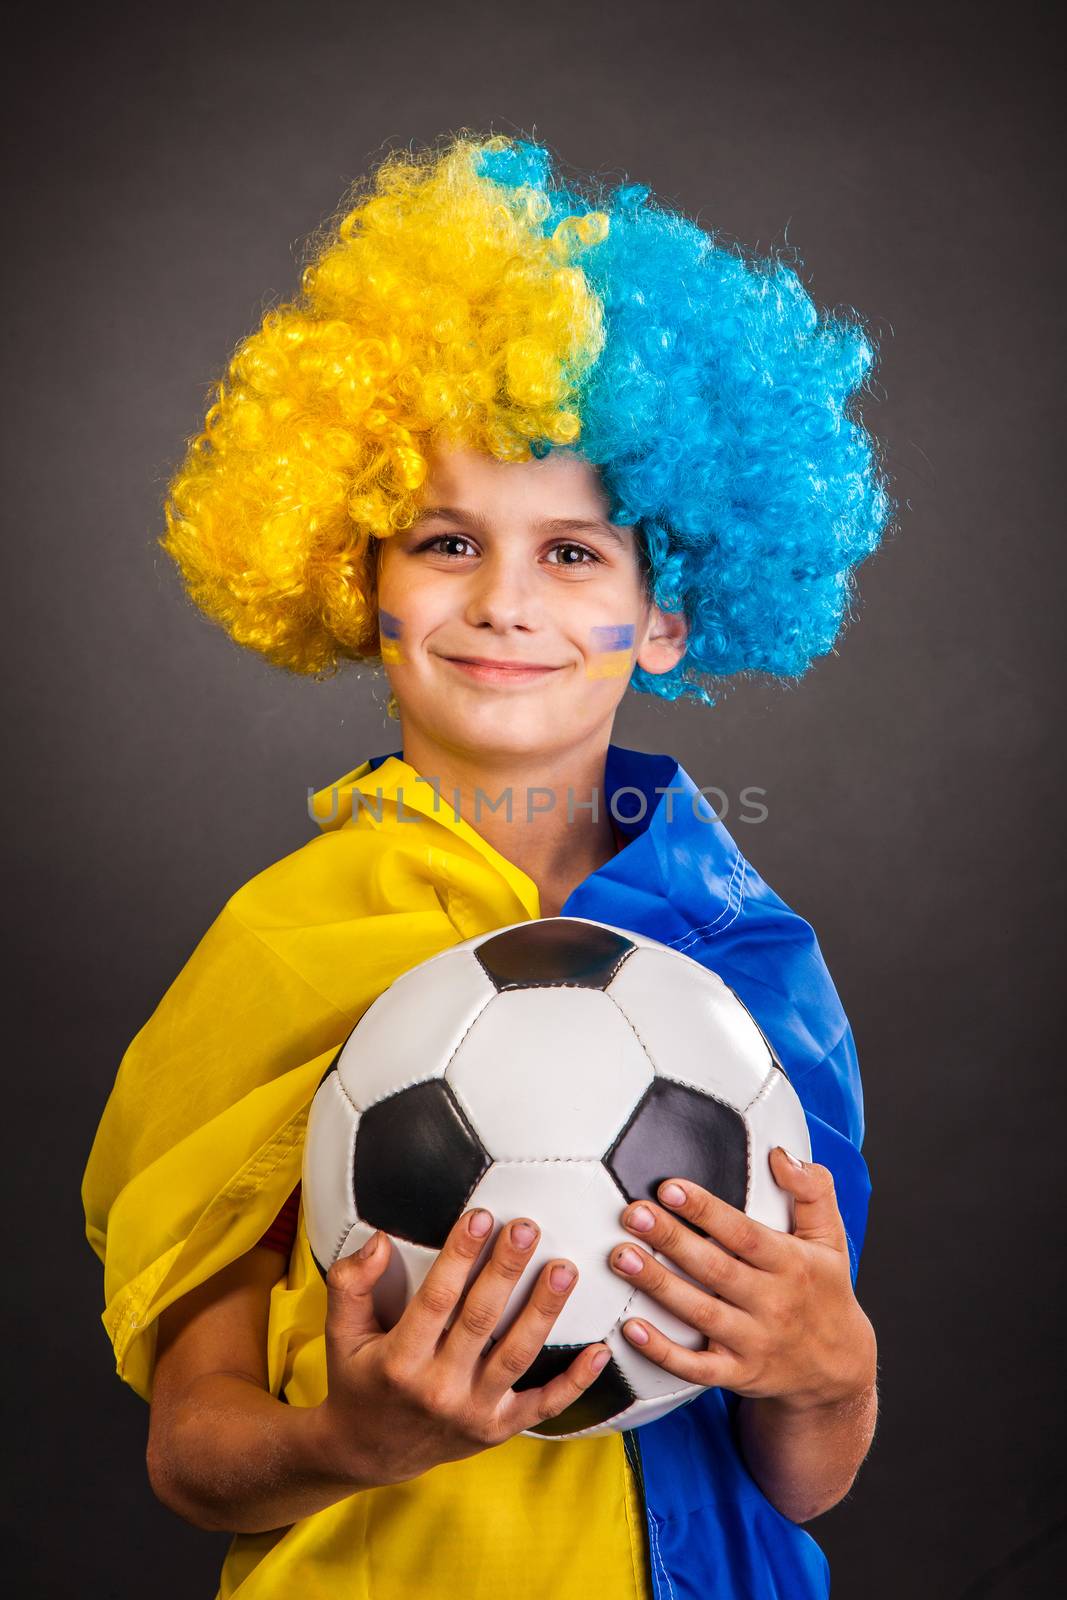 Football fan with a blue and yellow ukrainian flag painted on his face on black background